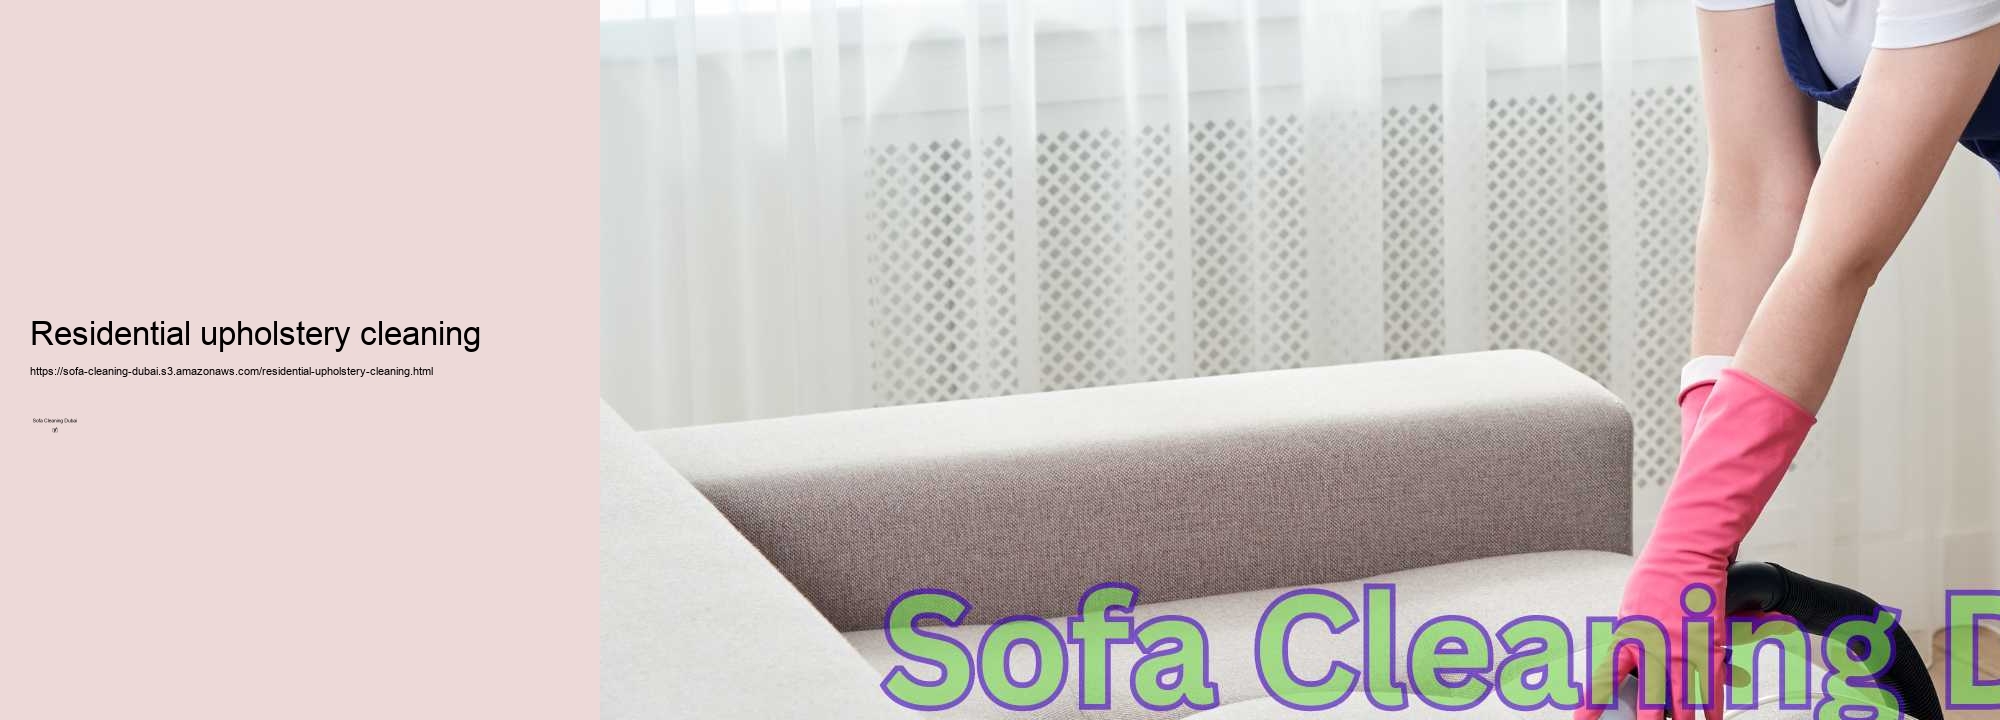 Residential upholstery cleaning